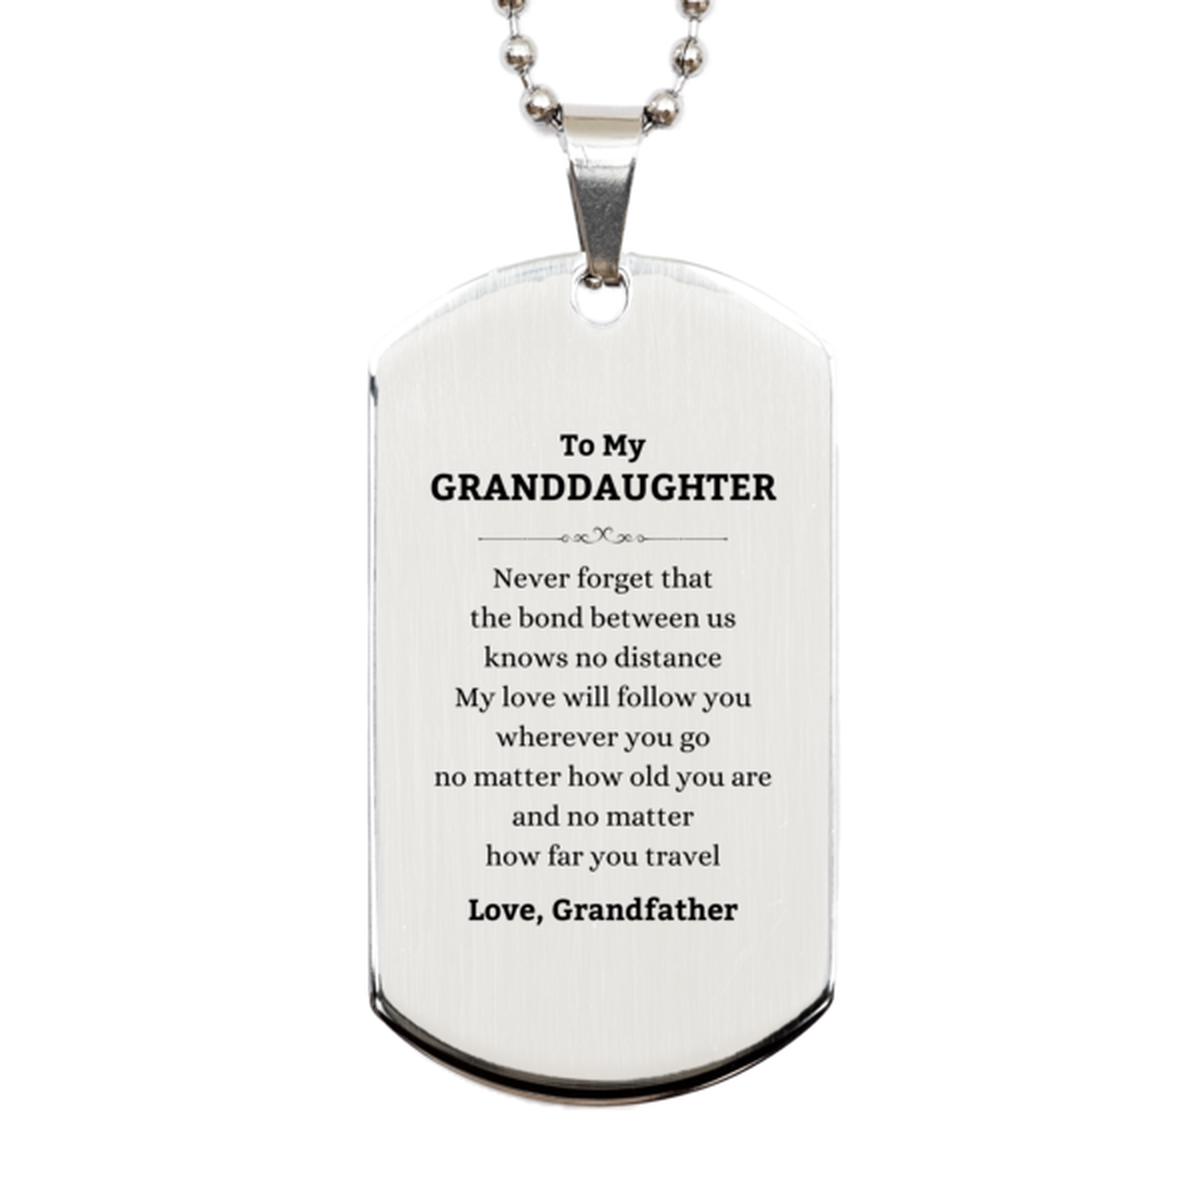 Granddaughter Birthday Gifts from Grandfather, Adjustable Silver Dog Tag for Granddaughter Christmas Graduation Unique Gifts Granddaughter Never forget that the bond between us knows no distance. Love, Grandfather